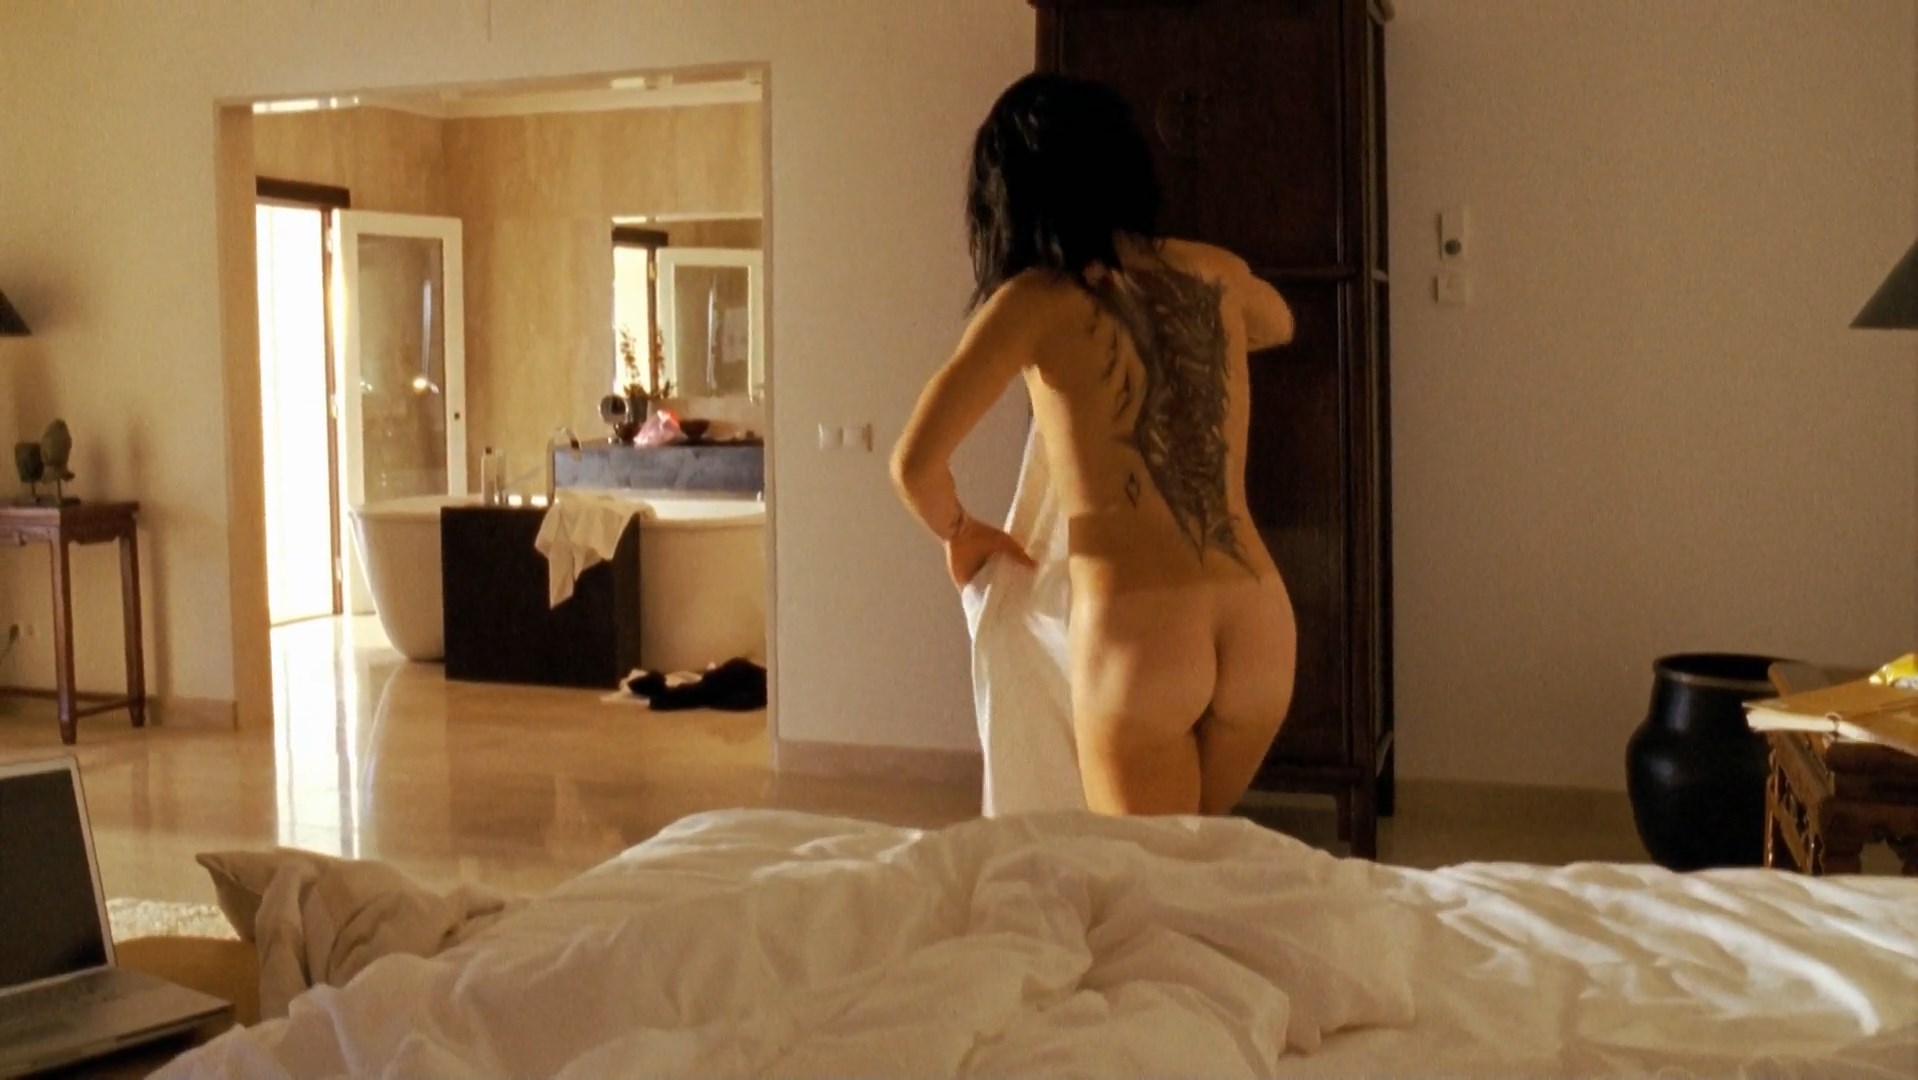 Noomi Rapace Nude. 